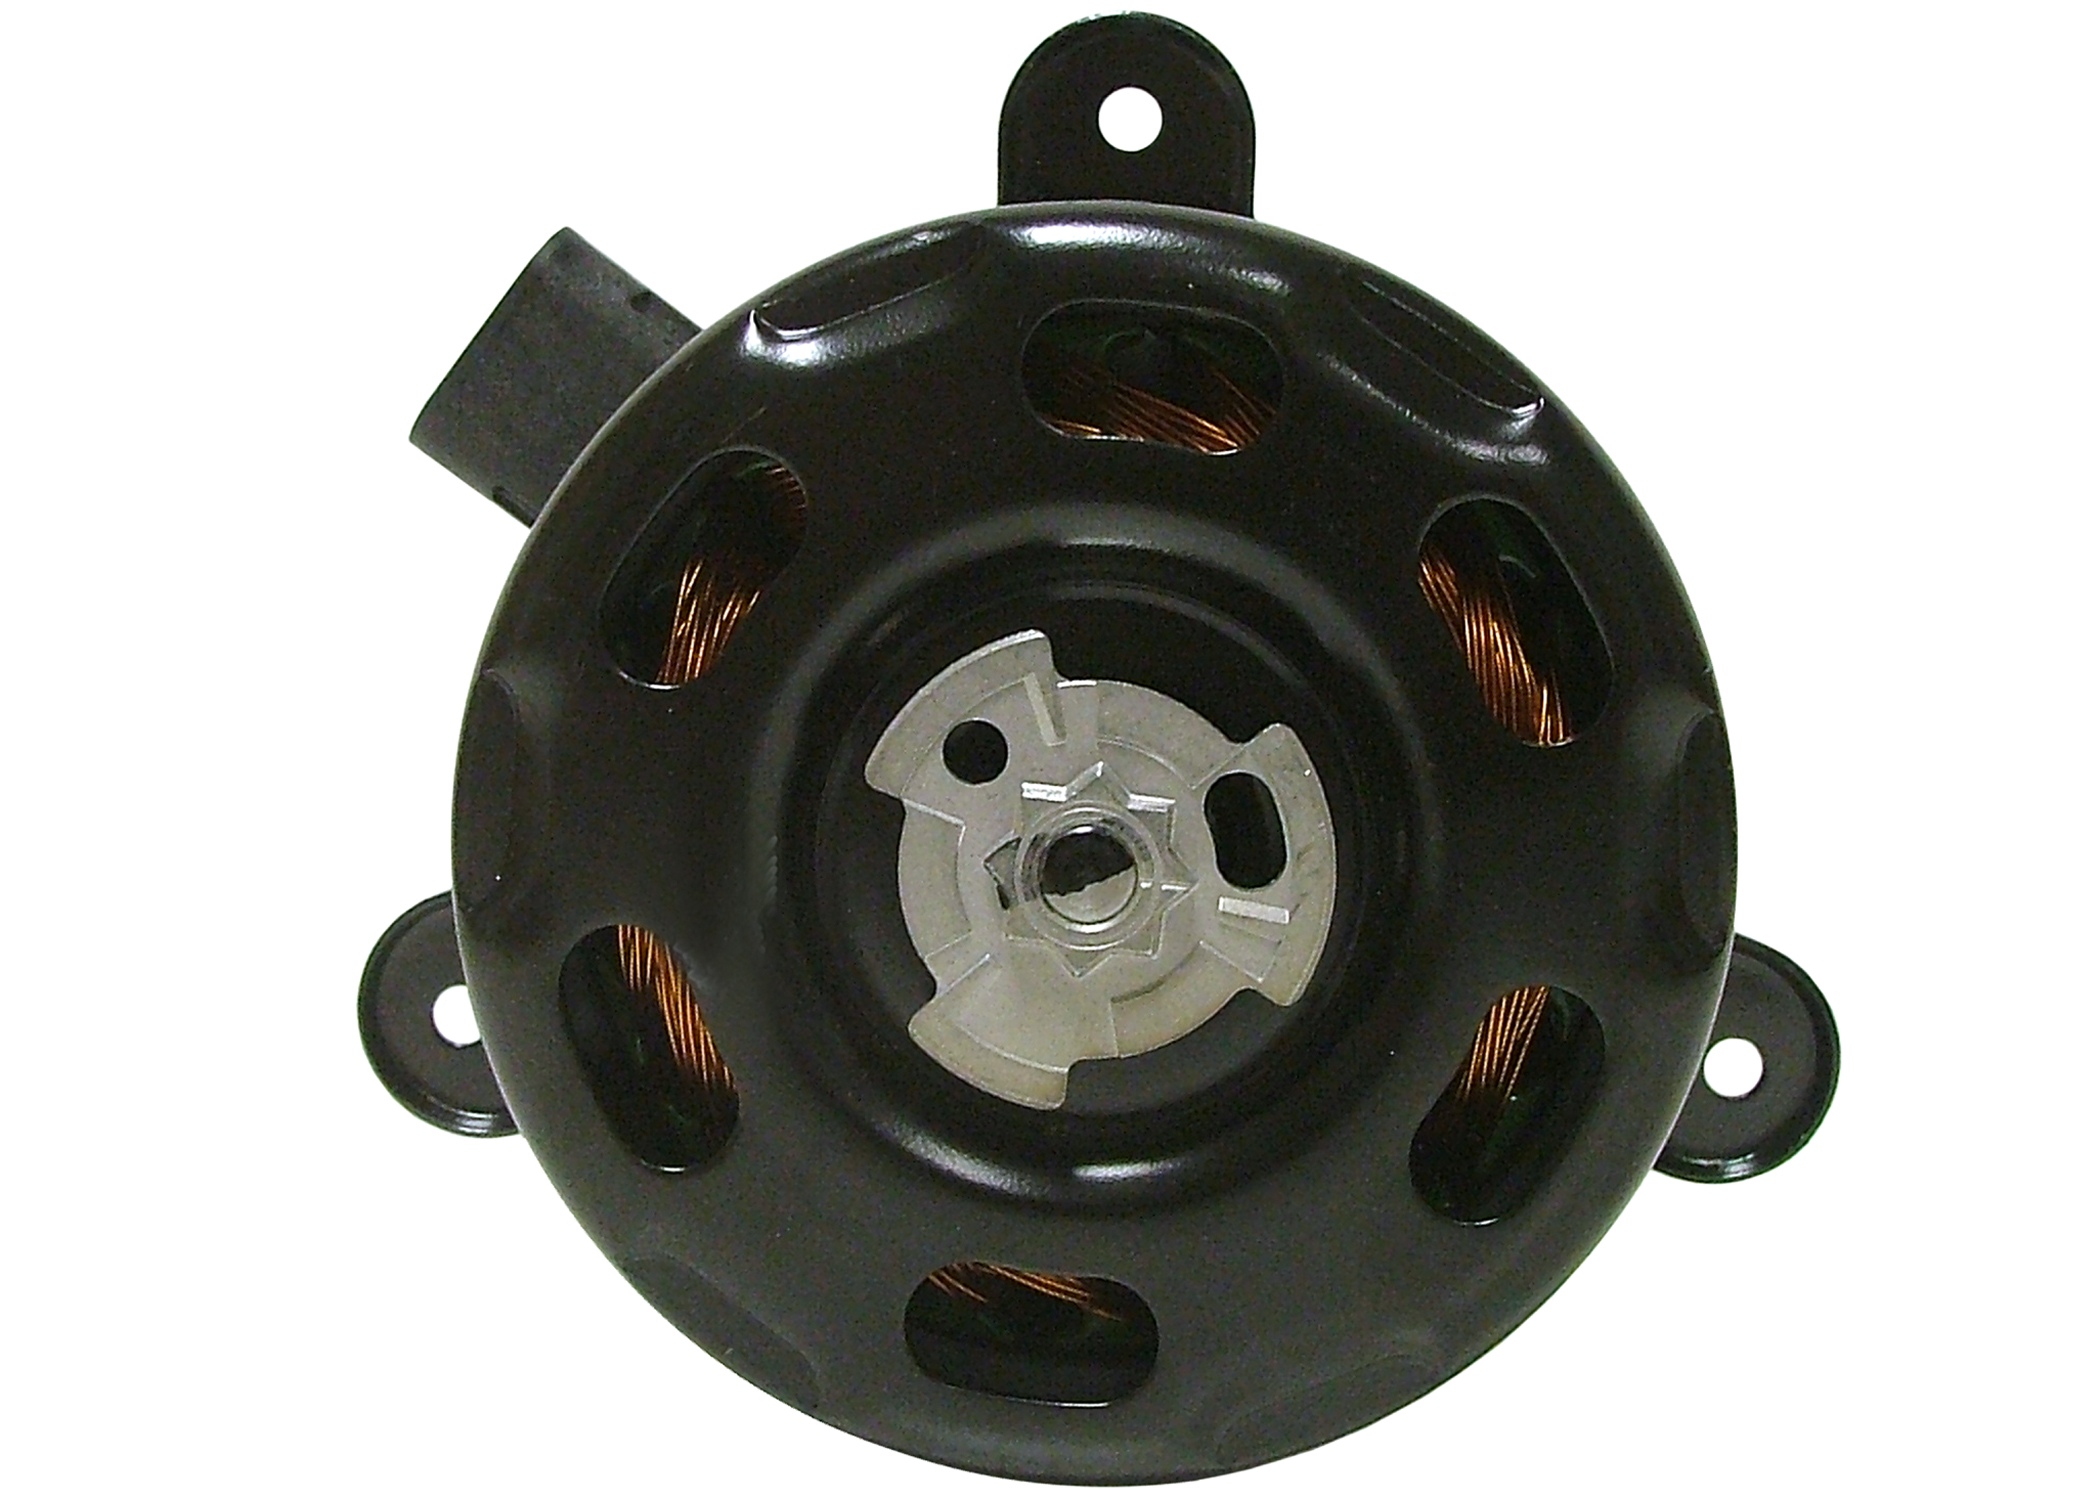 GM GENUINE PARTS CANADA - Engine Cooling Fan Motor Kit - GMC 15-80641